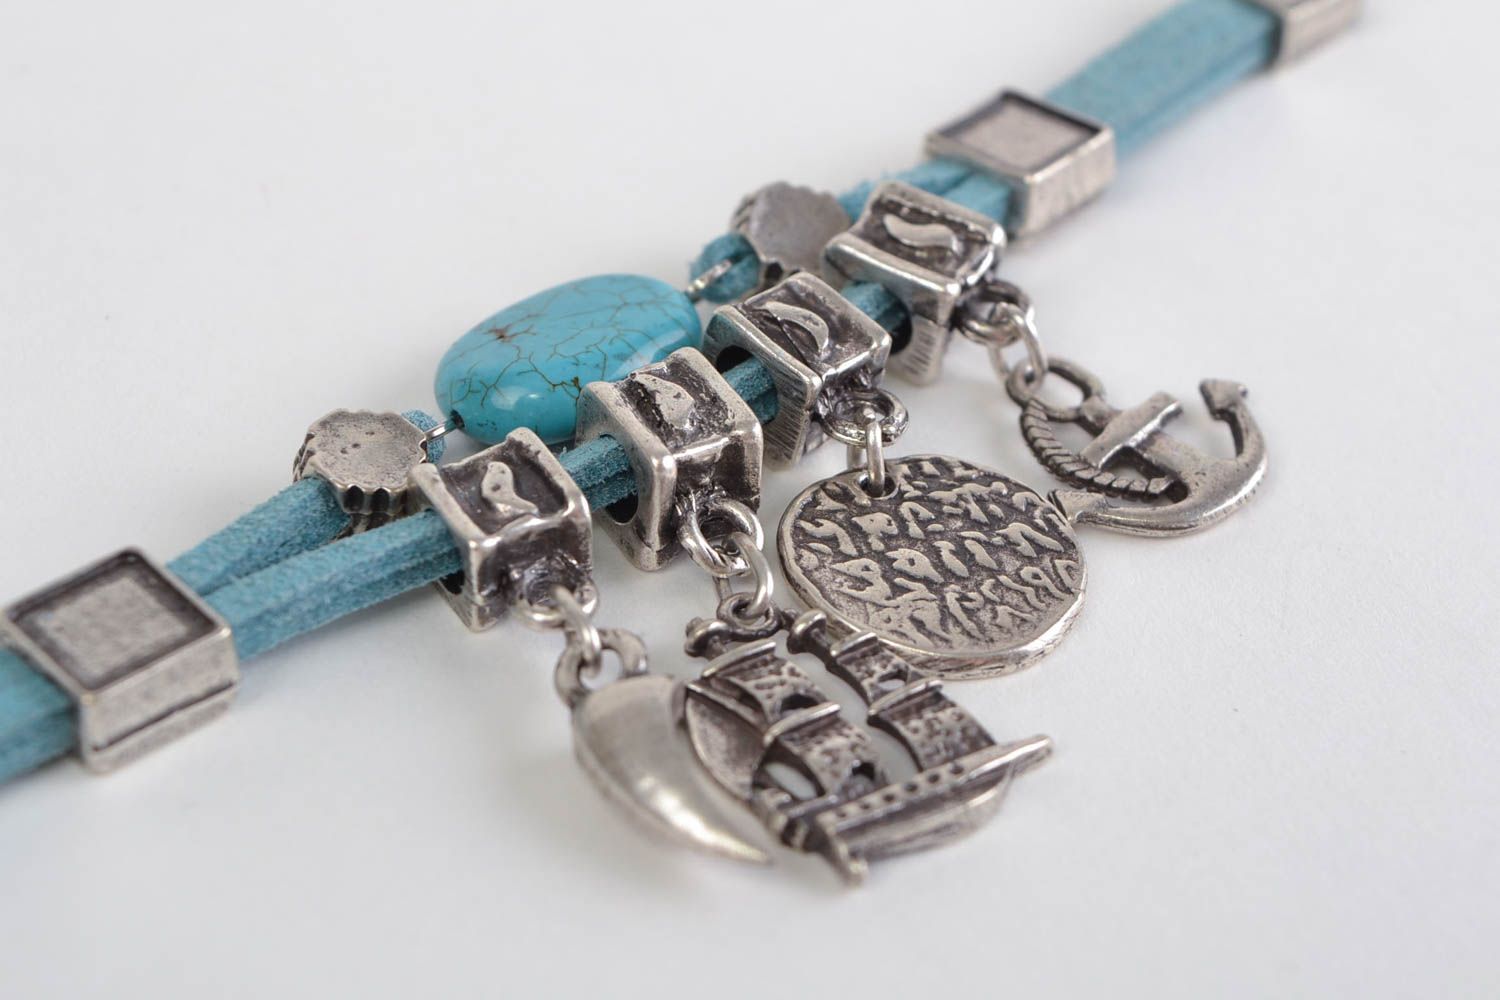 Handmade leather cord wrist bracelet with metal charms and turquoise for women photo 5